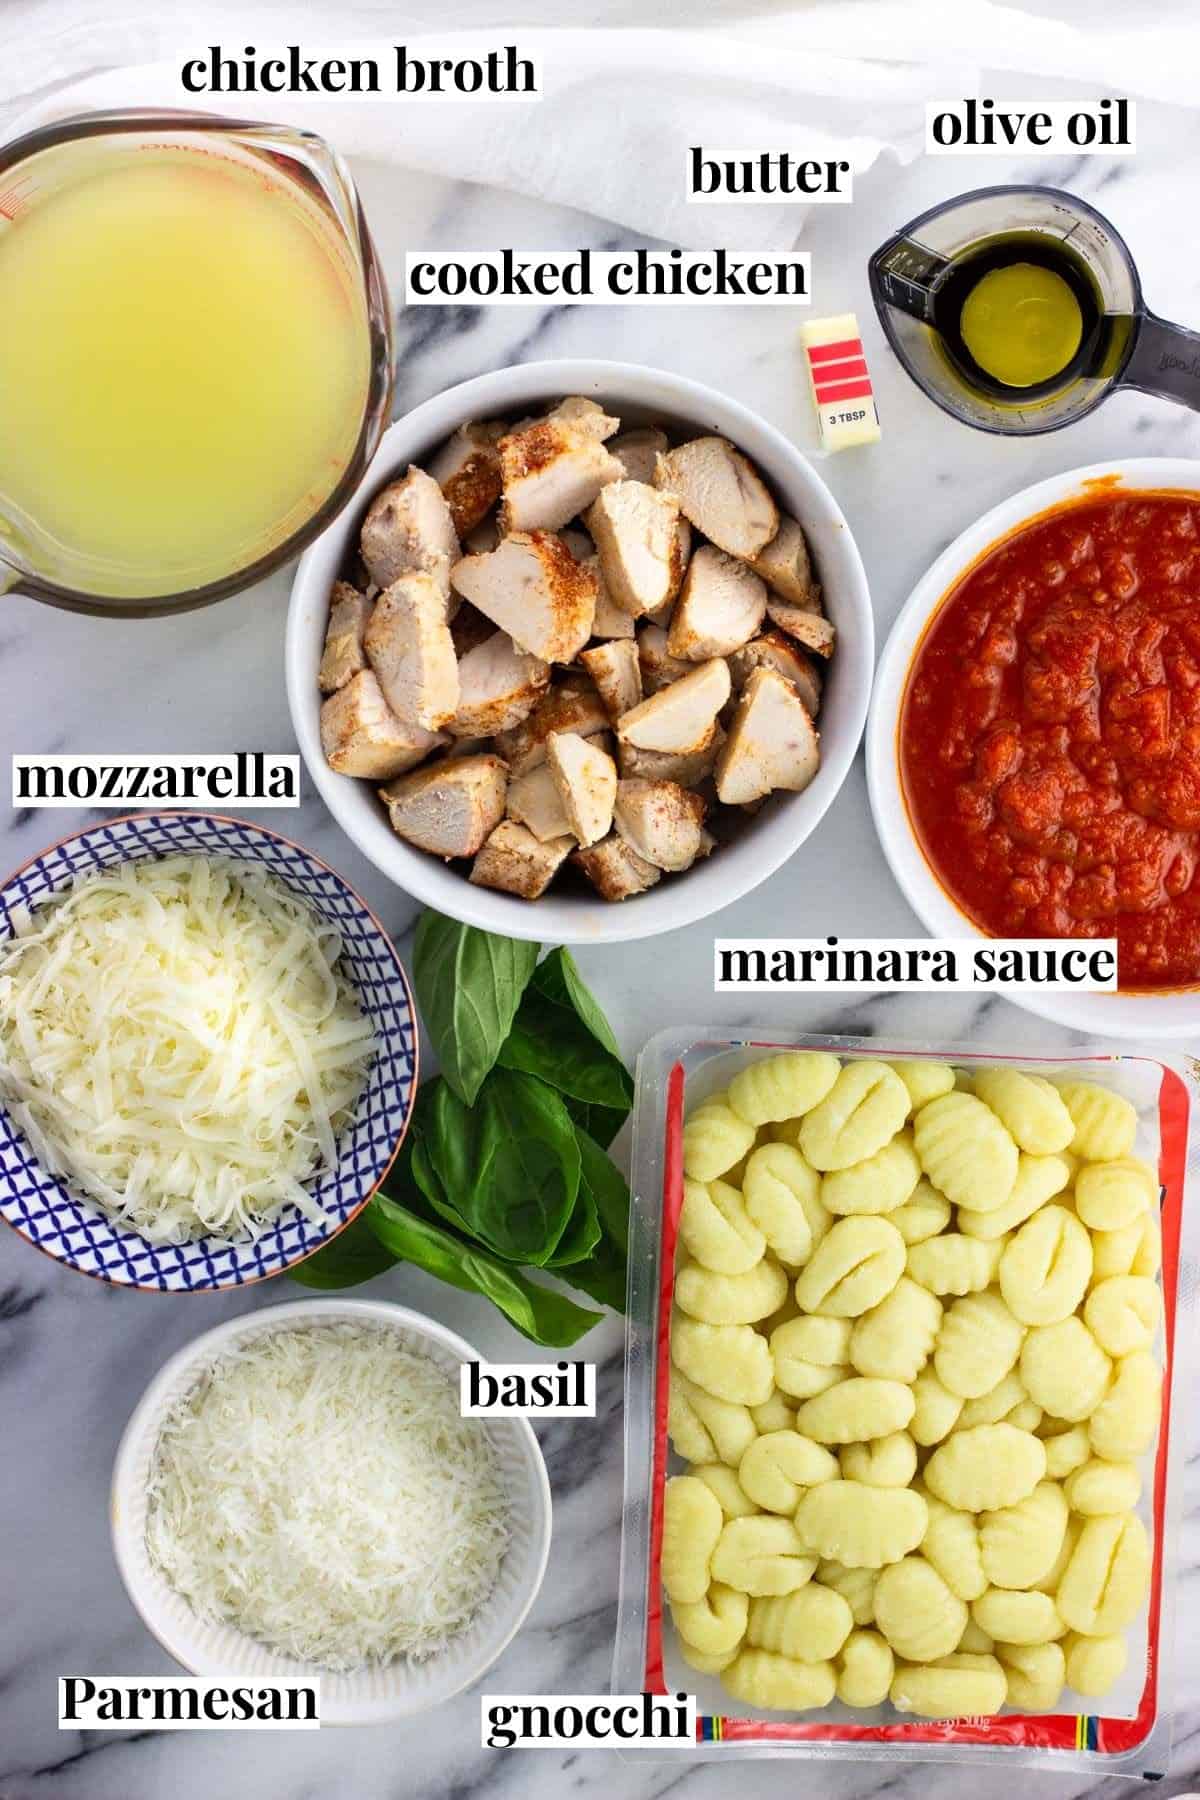 Labeled chicken Parmesan gnocchi skillet ingredients in separate containers.